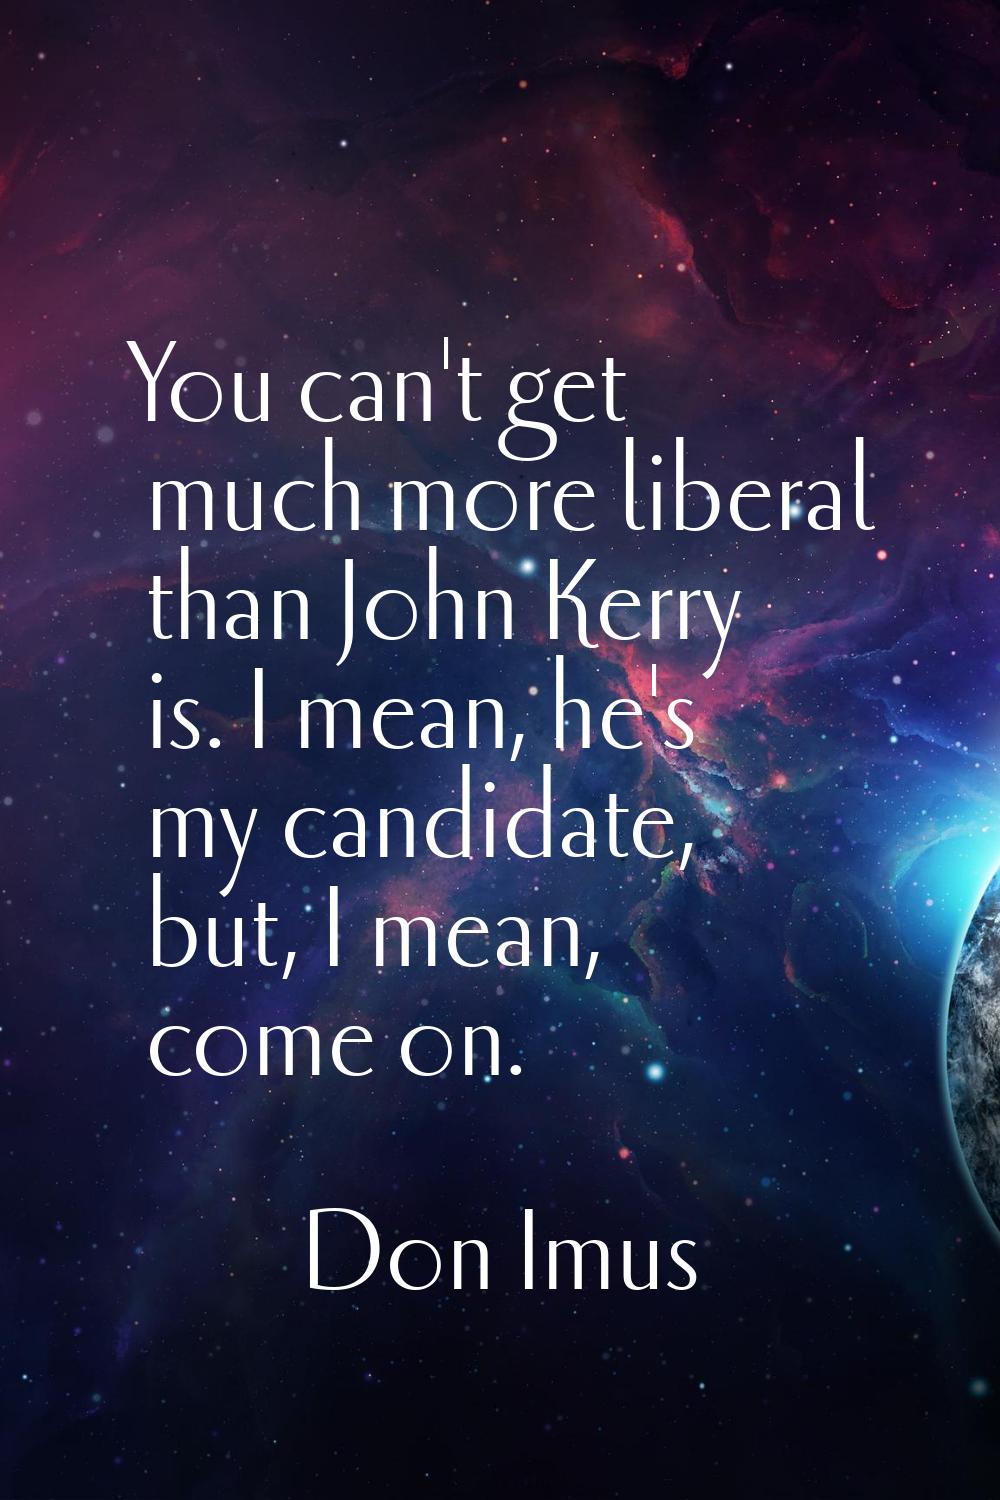 You can't get much more liberal than John Kerry is. I mean, he's my candidate, but, I mean, come on